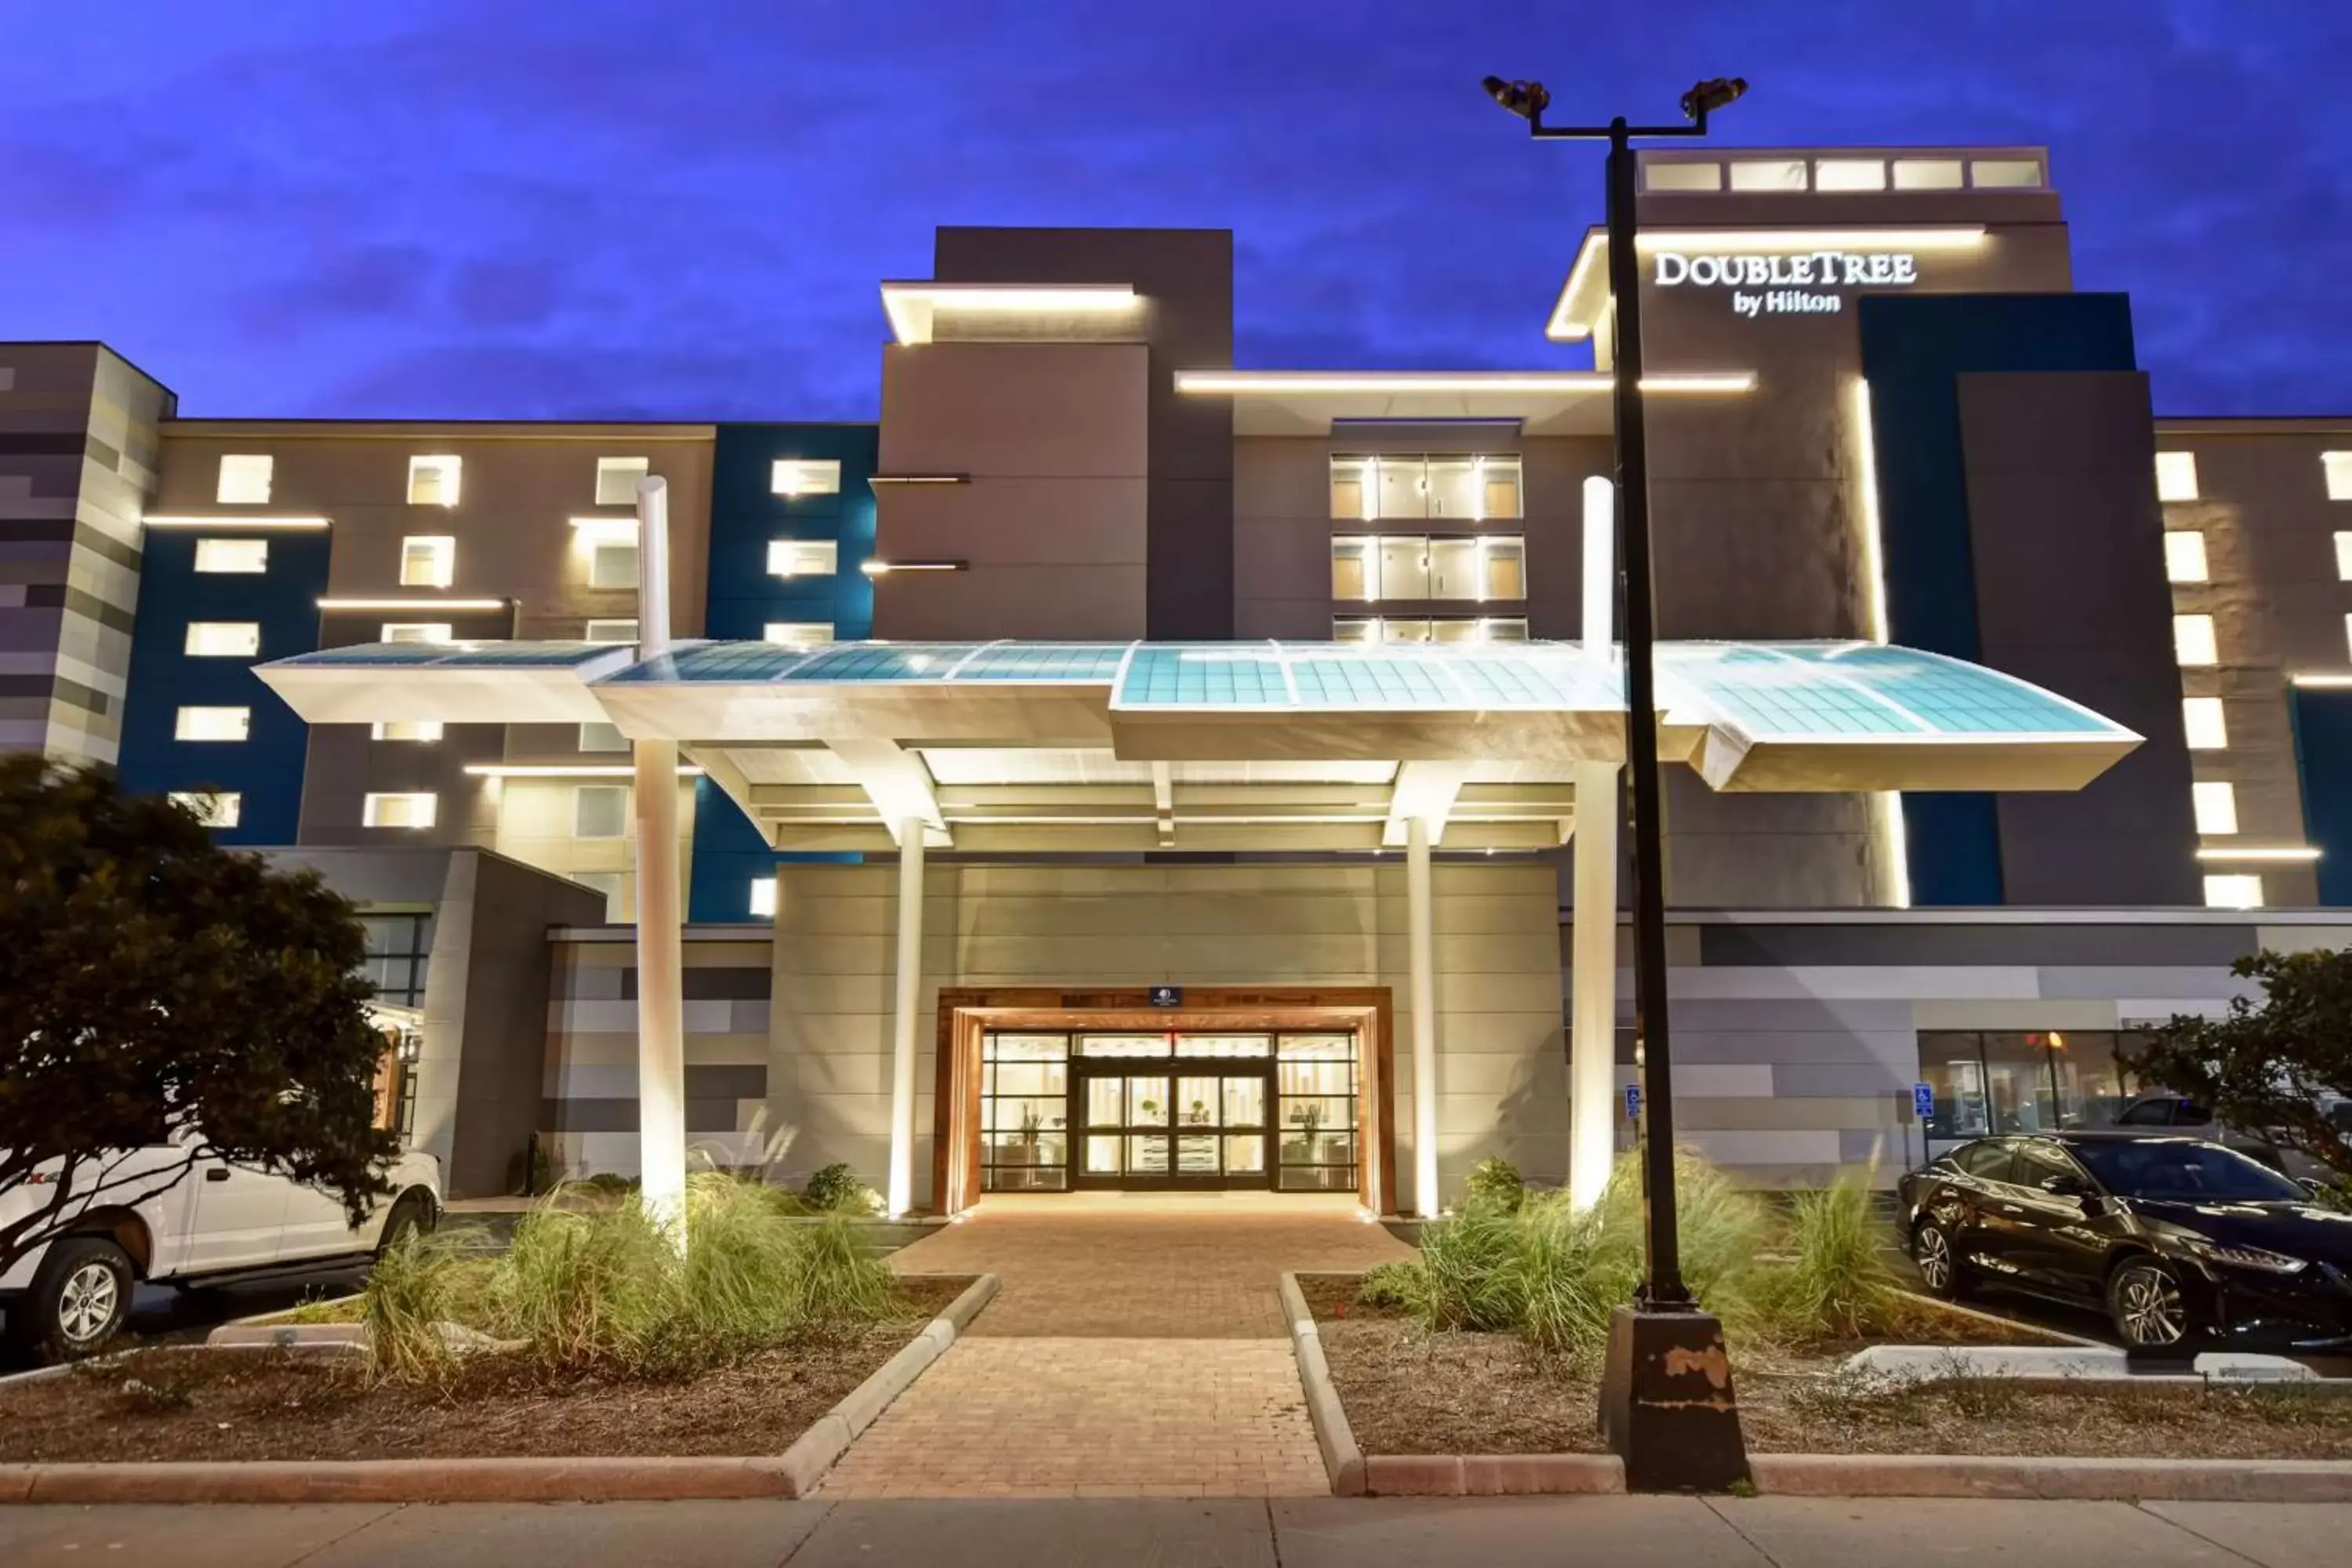 Property Building in DoubleTree by Hilton Oceanfront Virginia Beach